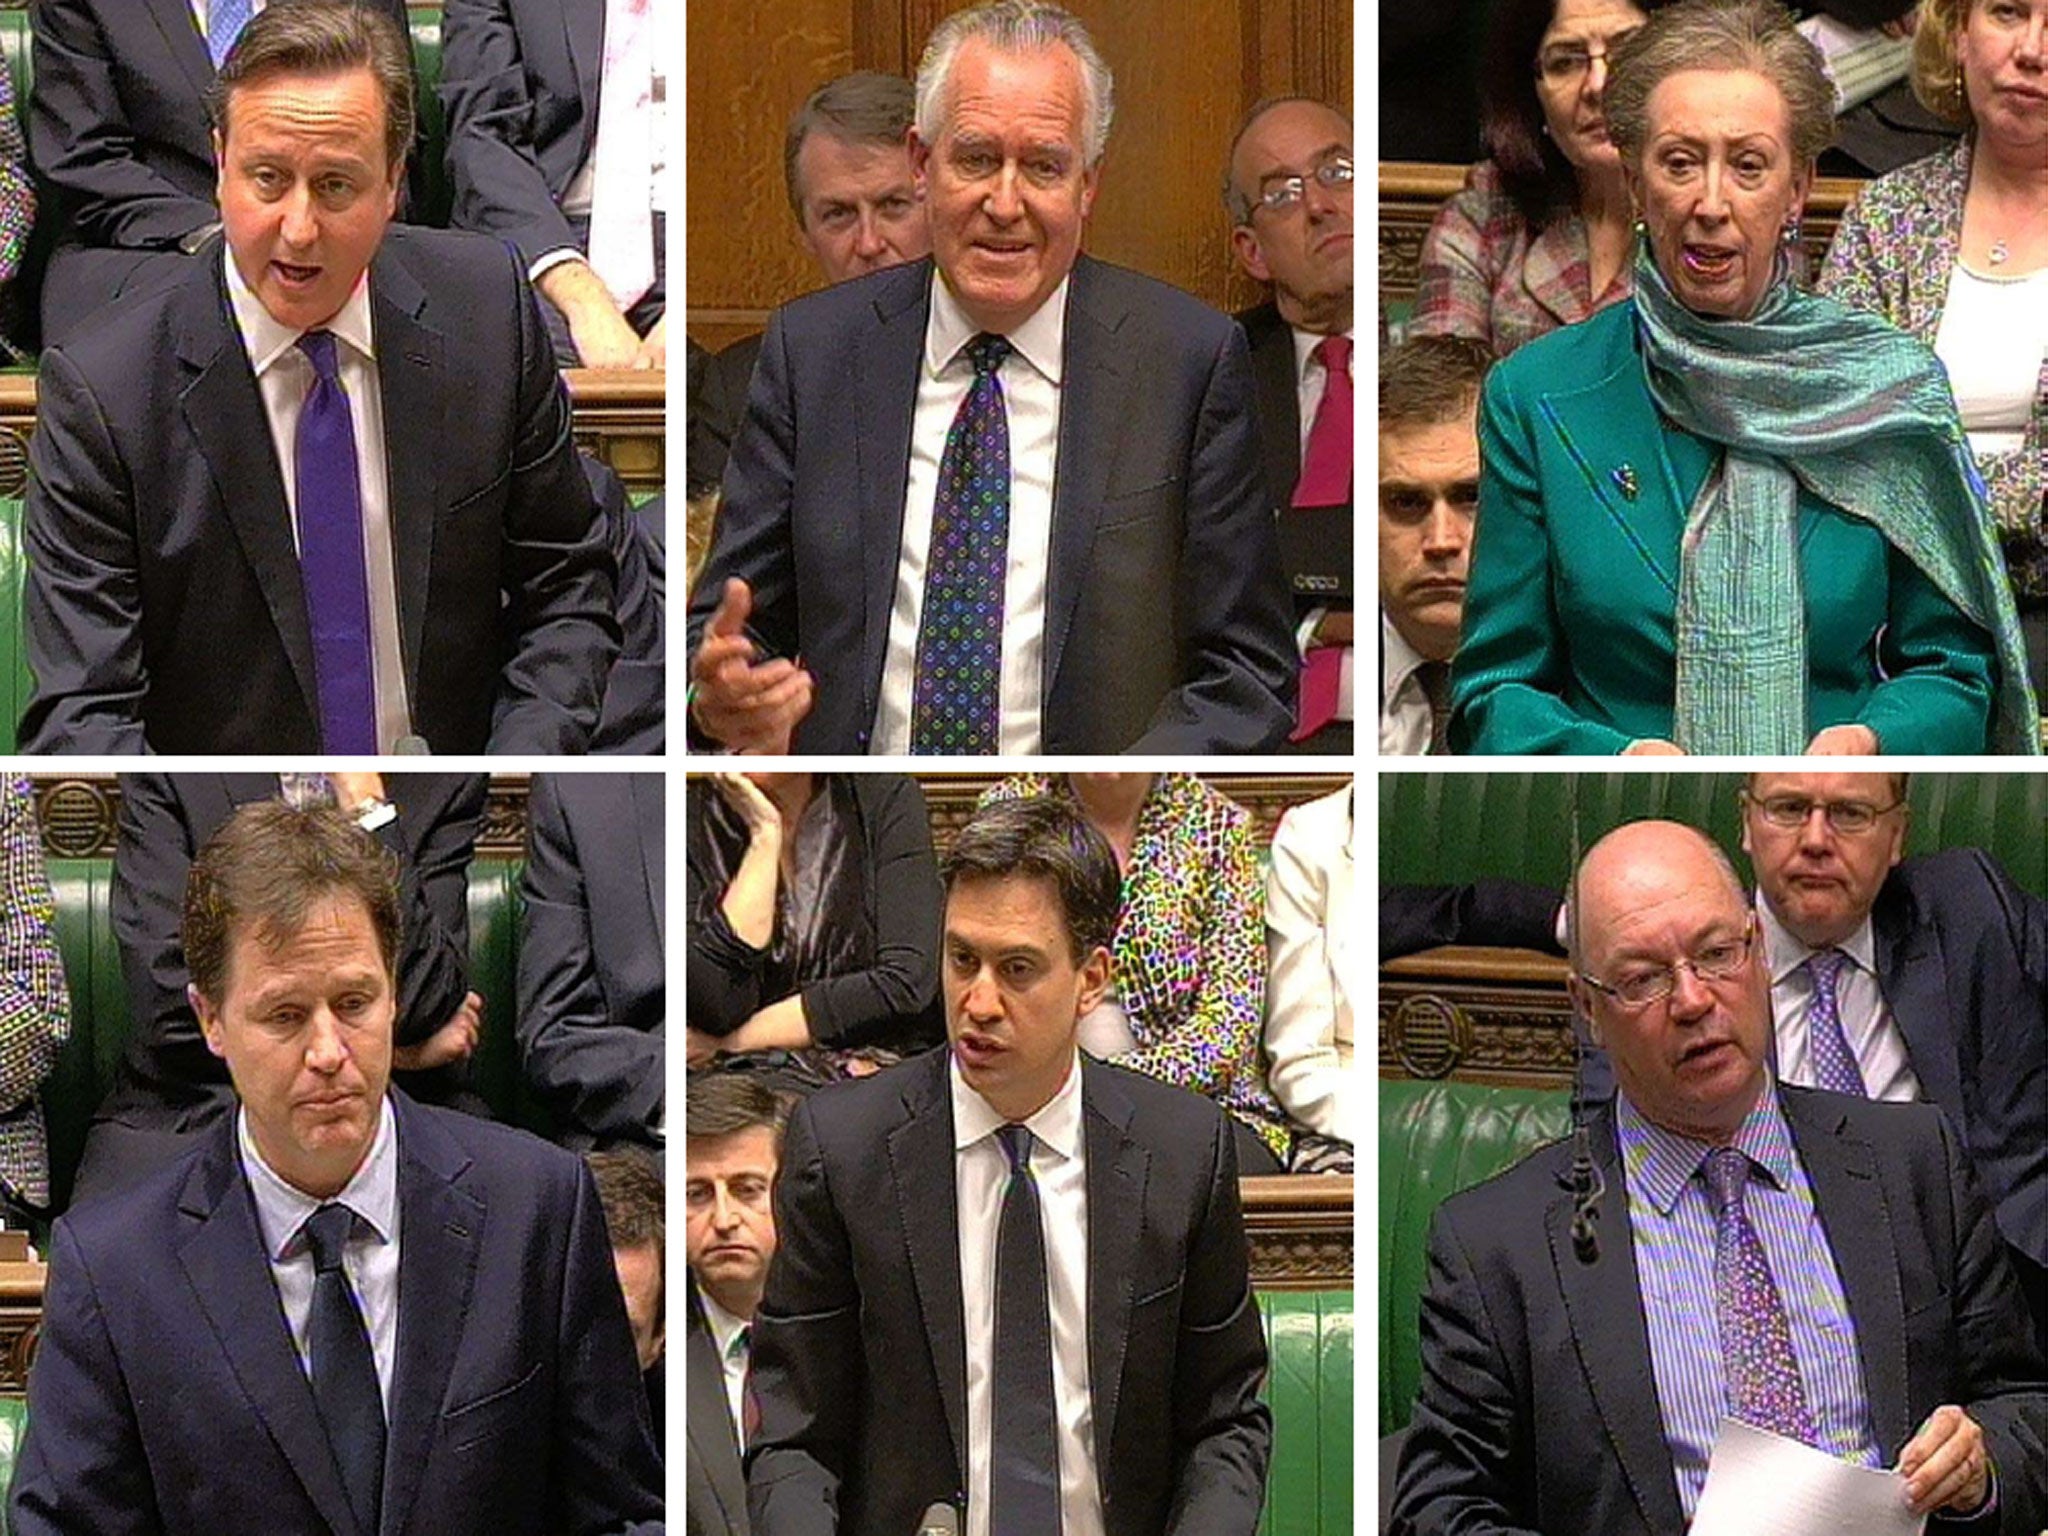 Clockwise from top left: David Cameron, Peter Hain, Dame Margaret Beckett, Alistair Burt, Ed Miliband and Nick Clegg in the Commons